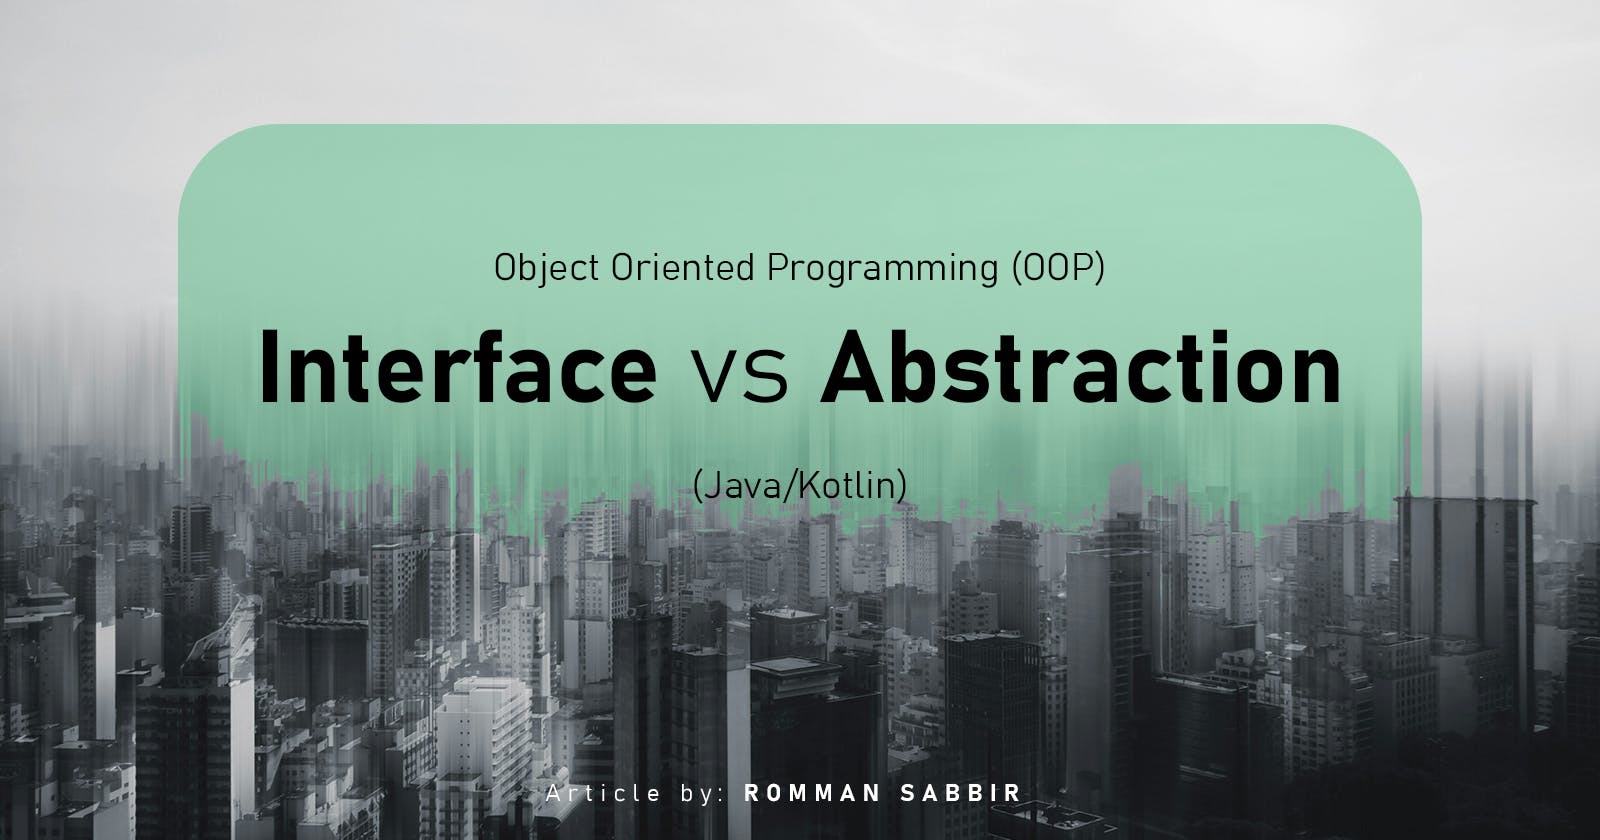 Object Oriented Programming (OOP) - Interface vs Abstraction (Java/Kotlin)